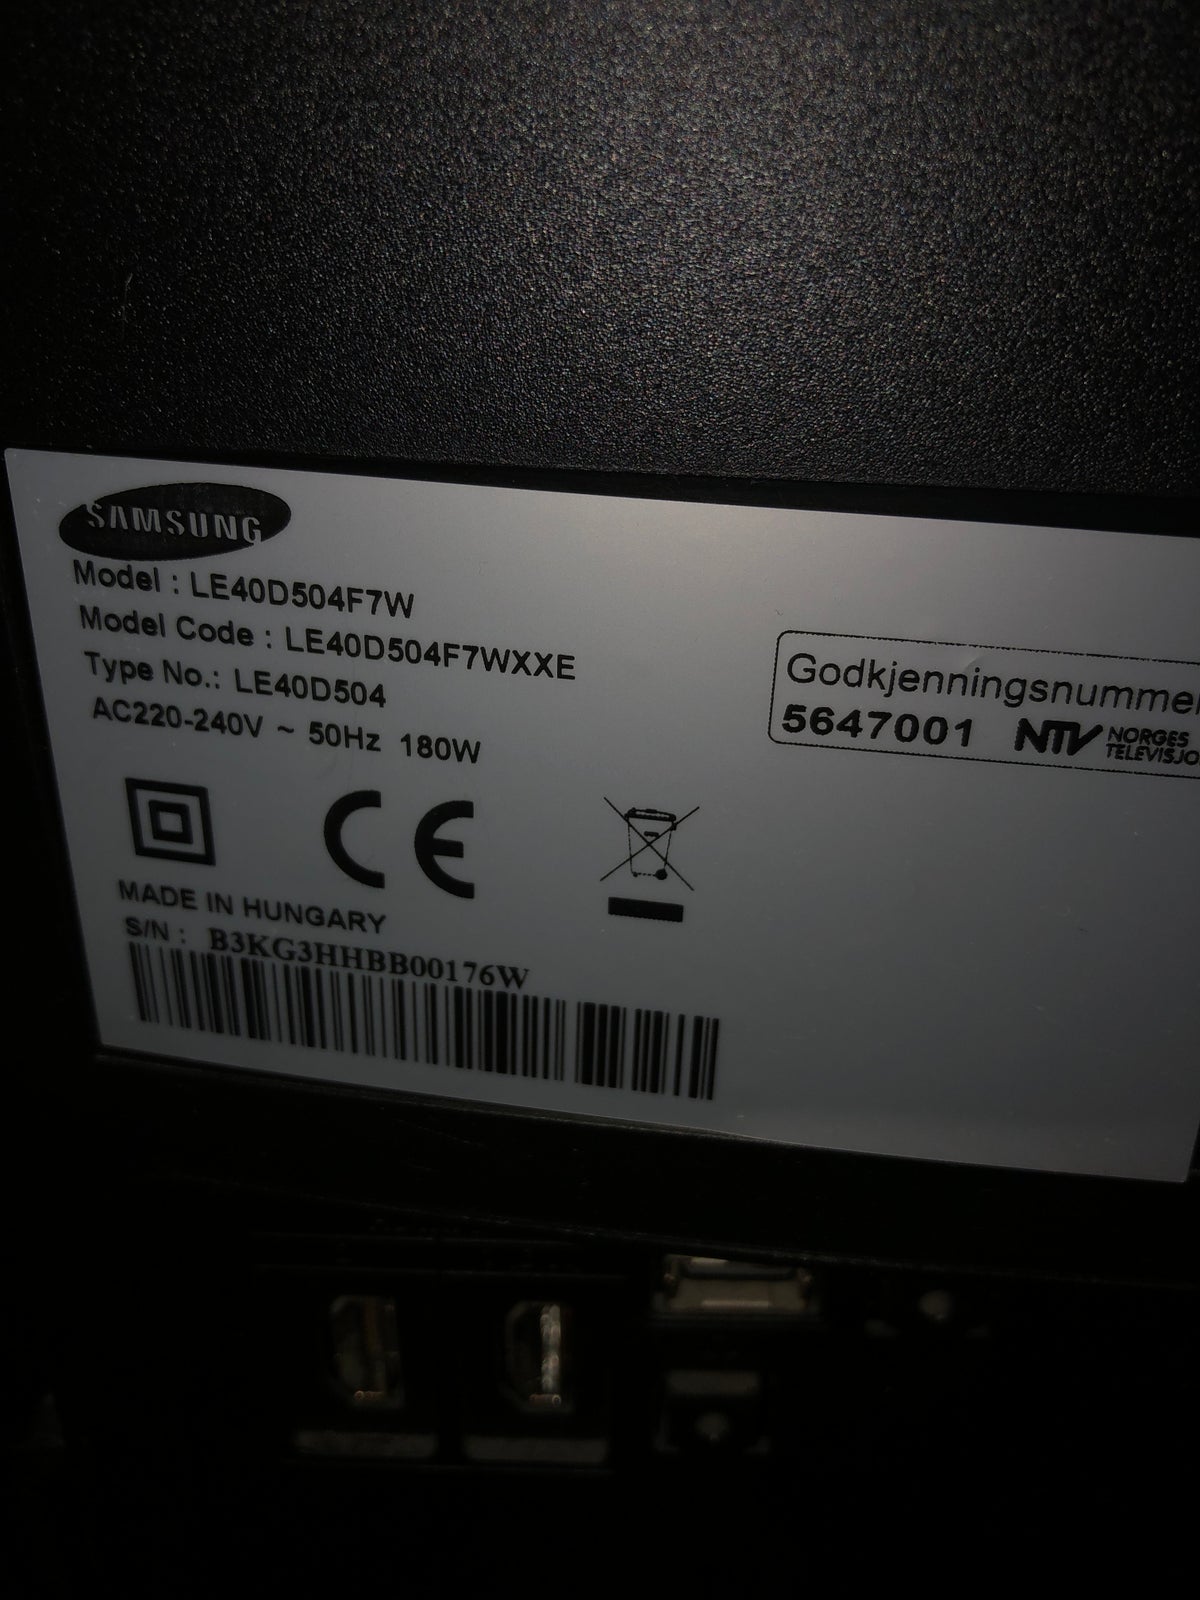 andet, Samsung, LE40D504F7W